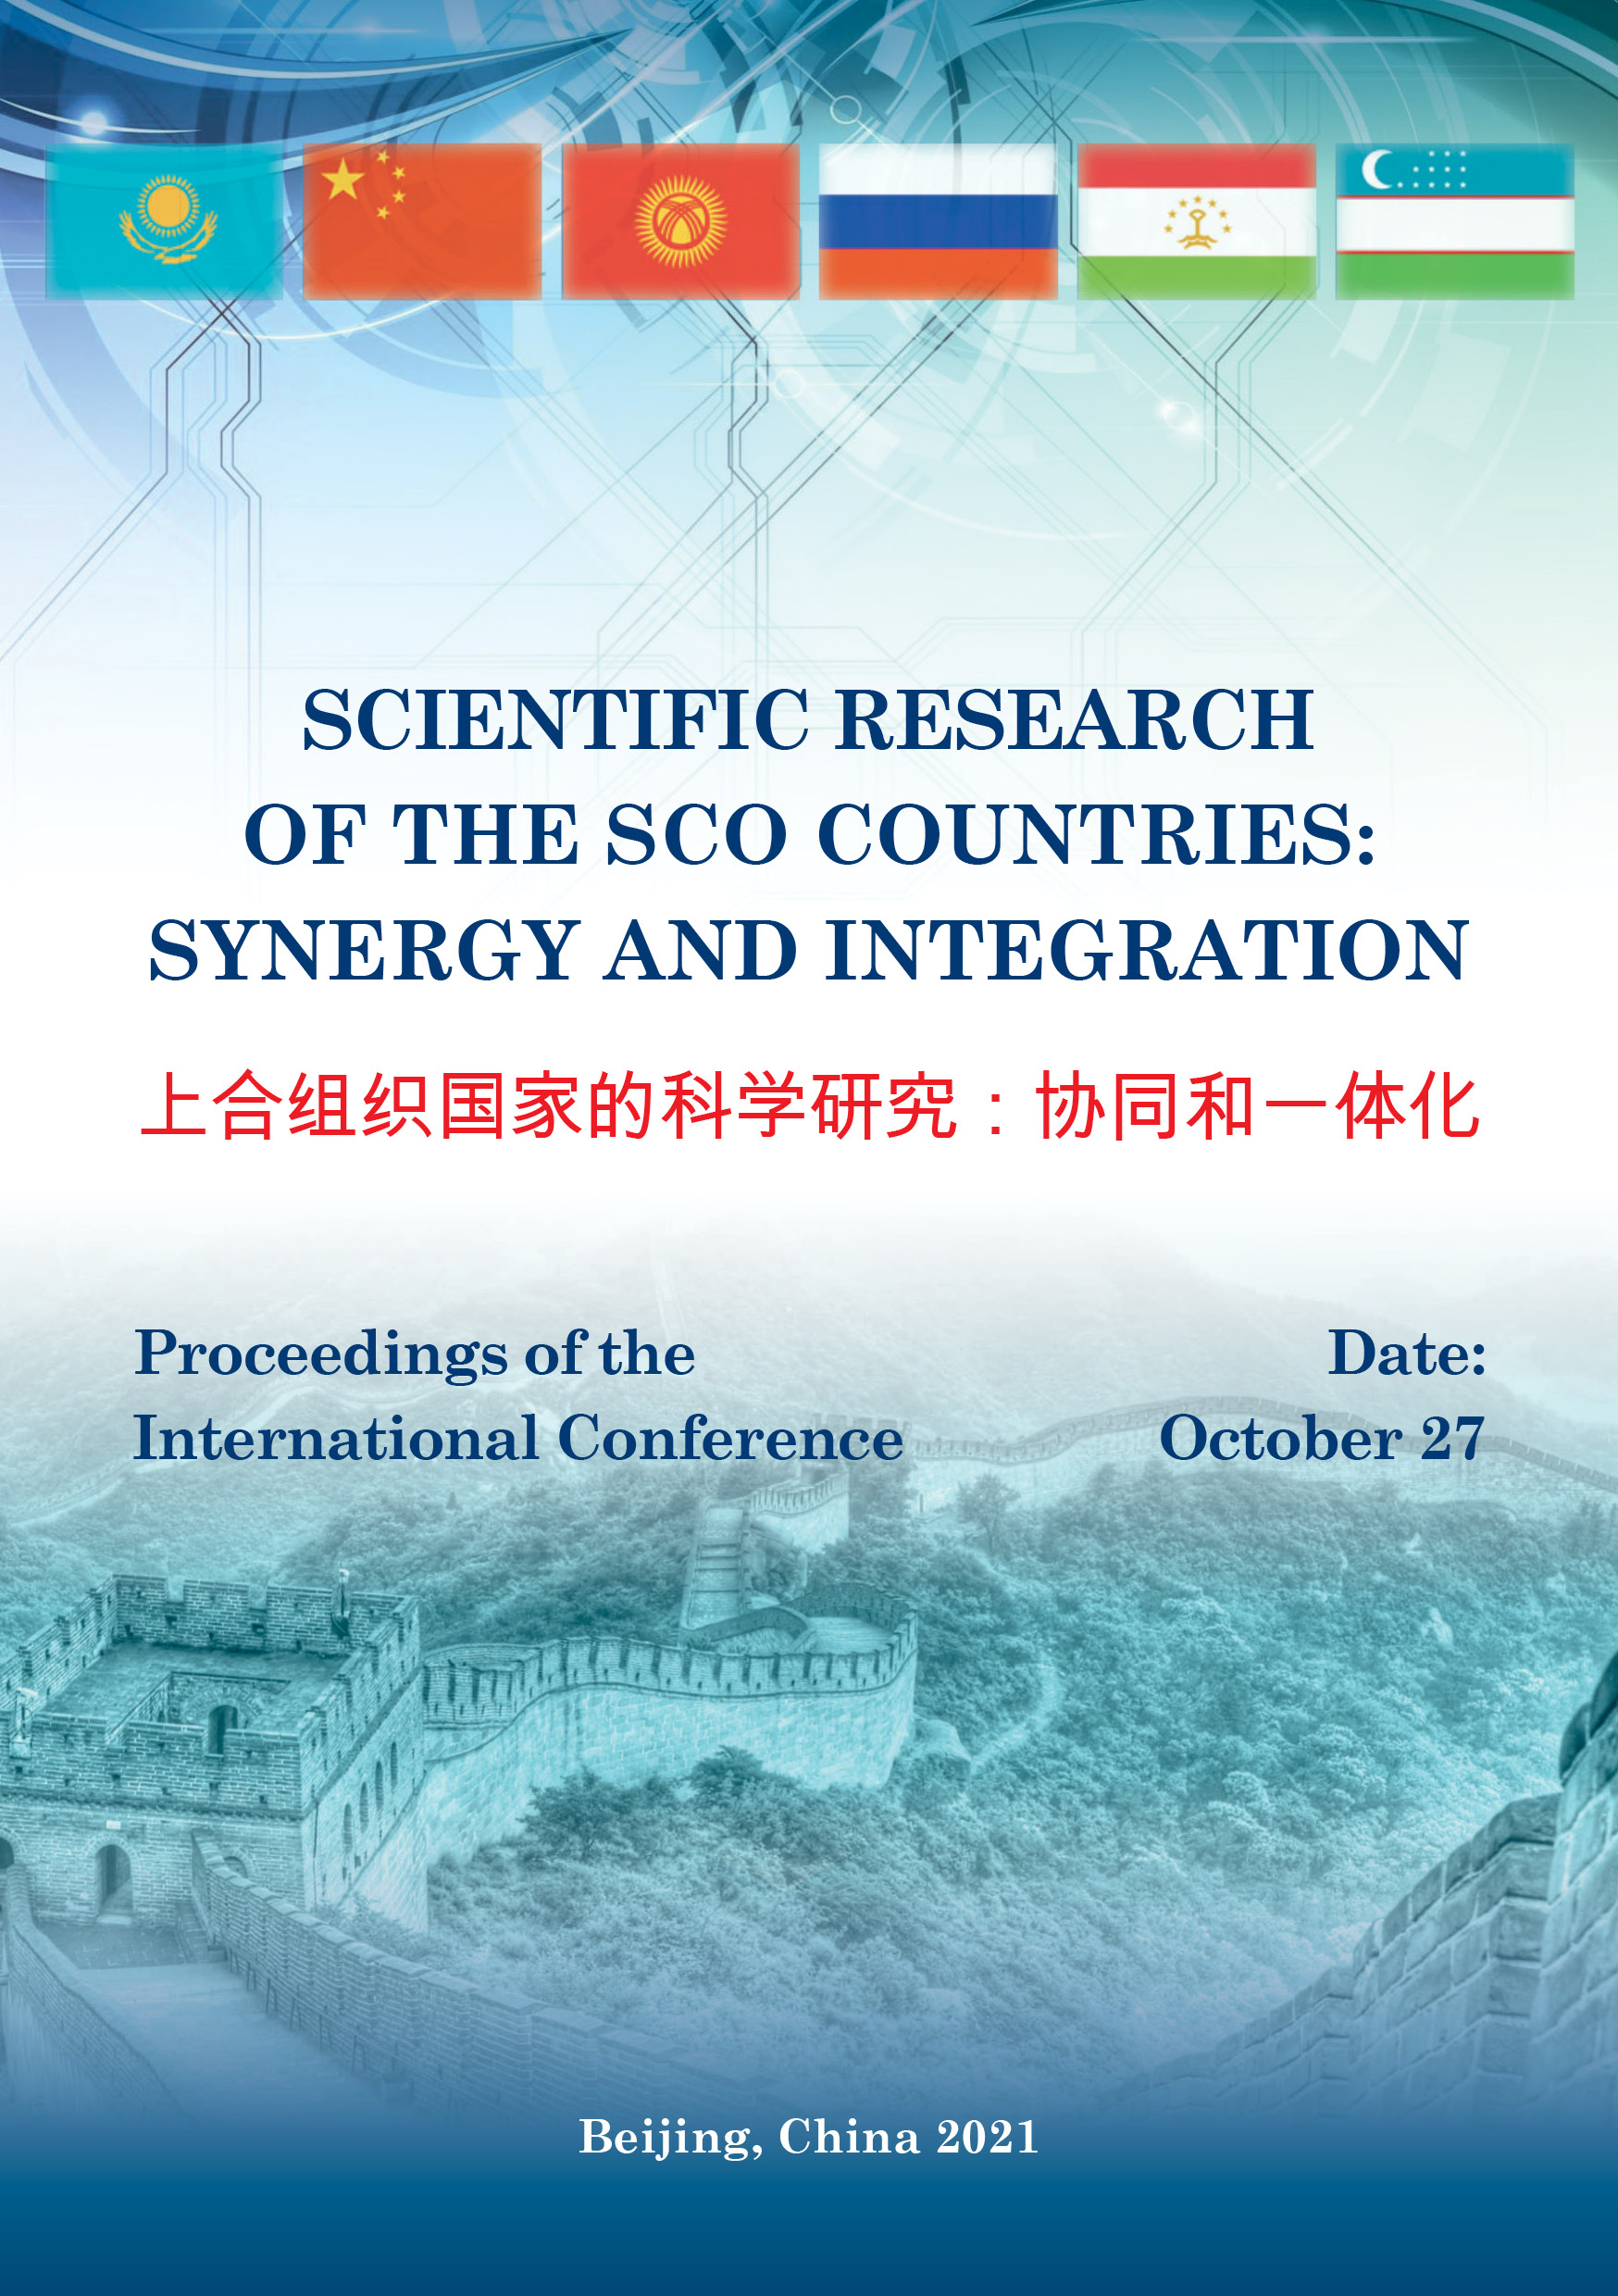                         SCIENTIFIC RESEARCH OF THE SCO COUNTRIES: SYNERGY AND INTEGRATION. OCTOBER 27, 2021. BEIJING, PRC. PART 1.
            